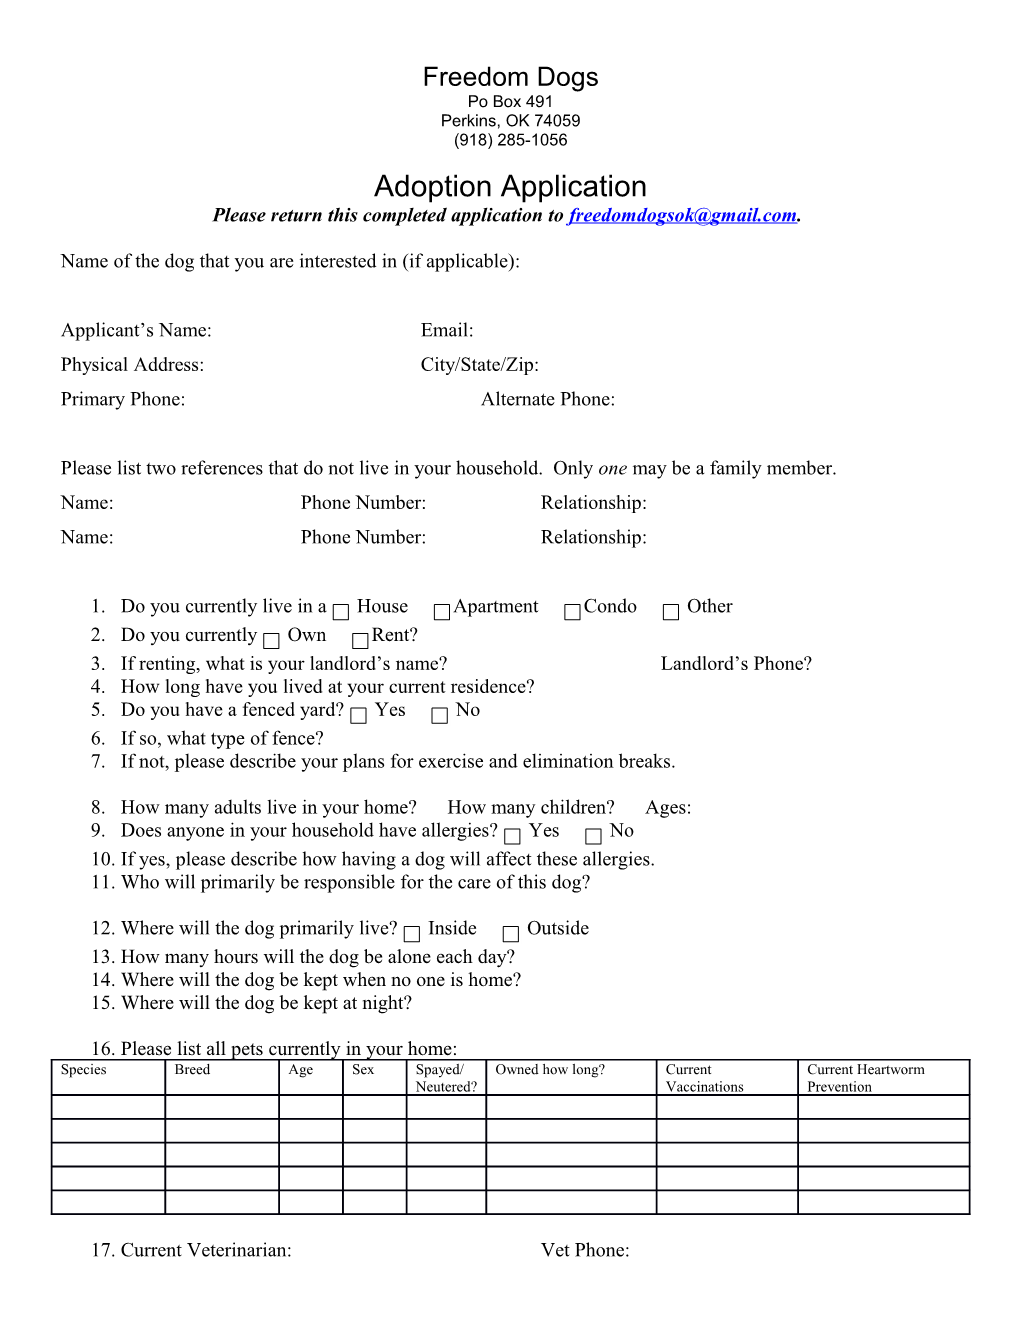 Please Return This Completed Application to